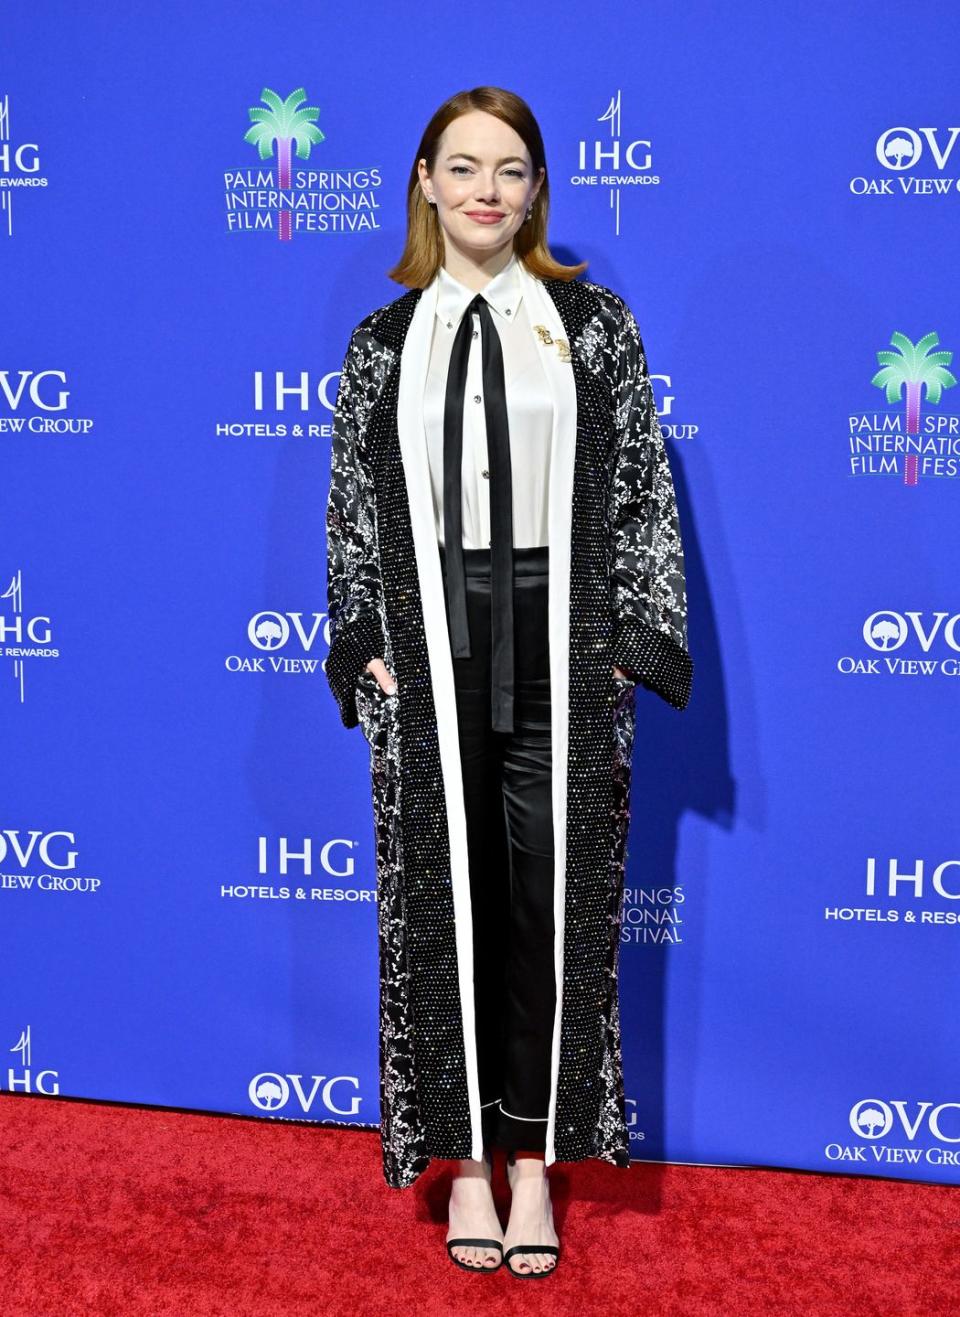 palm springs, california january 04 emma stone attends the 2024 palm springs international film festival film awards at palm springs convention center on january 04, 2024 in palm springs, california photo by axellebauer griffinfilmmagic